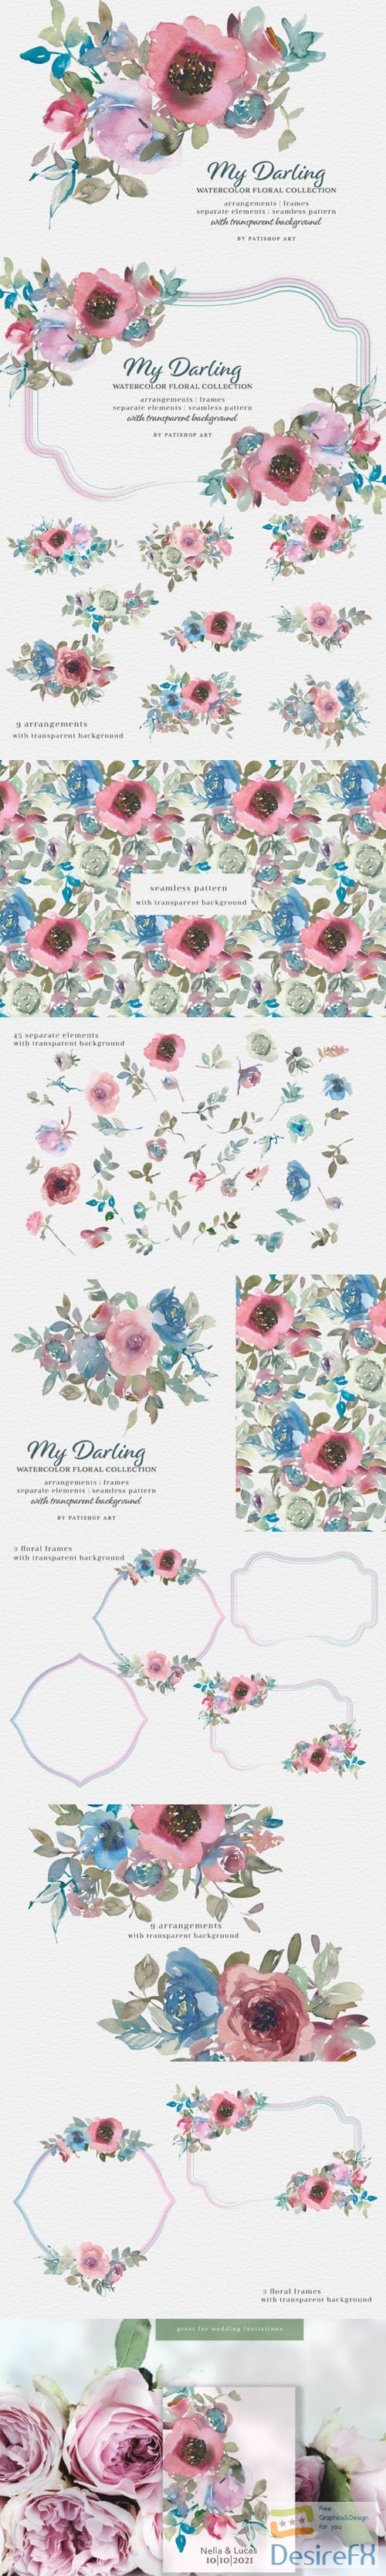 My Darling - Vintage Watercolor Floral Clipart Collection